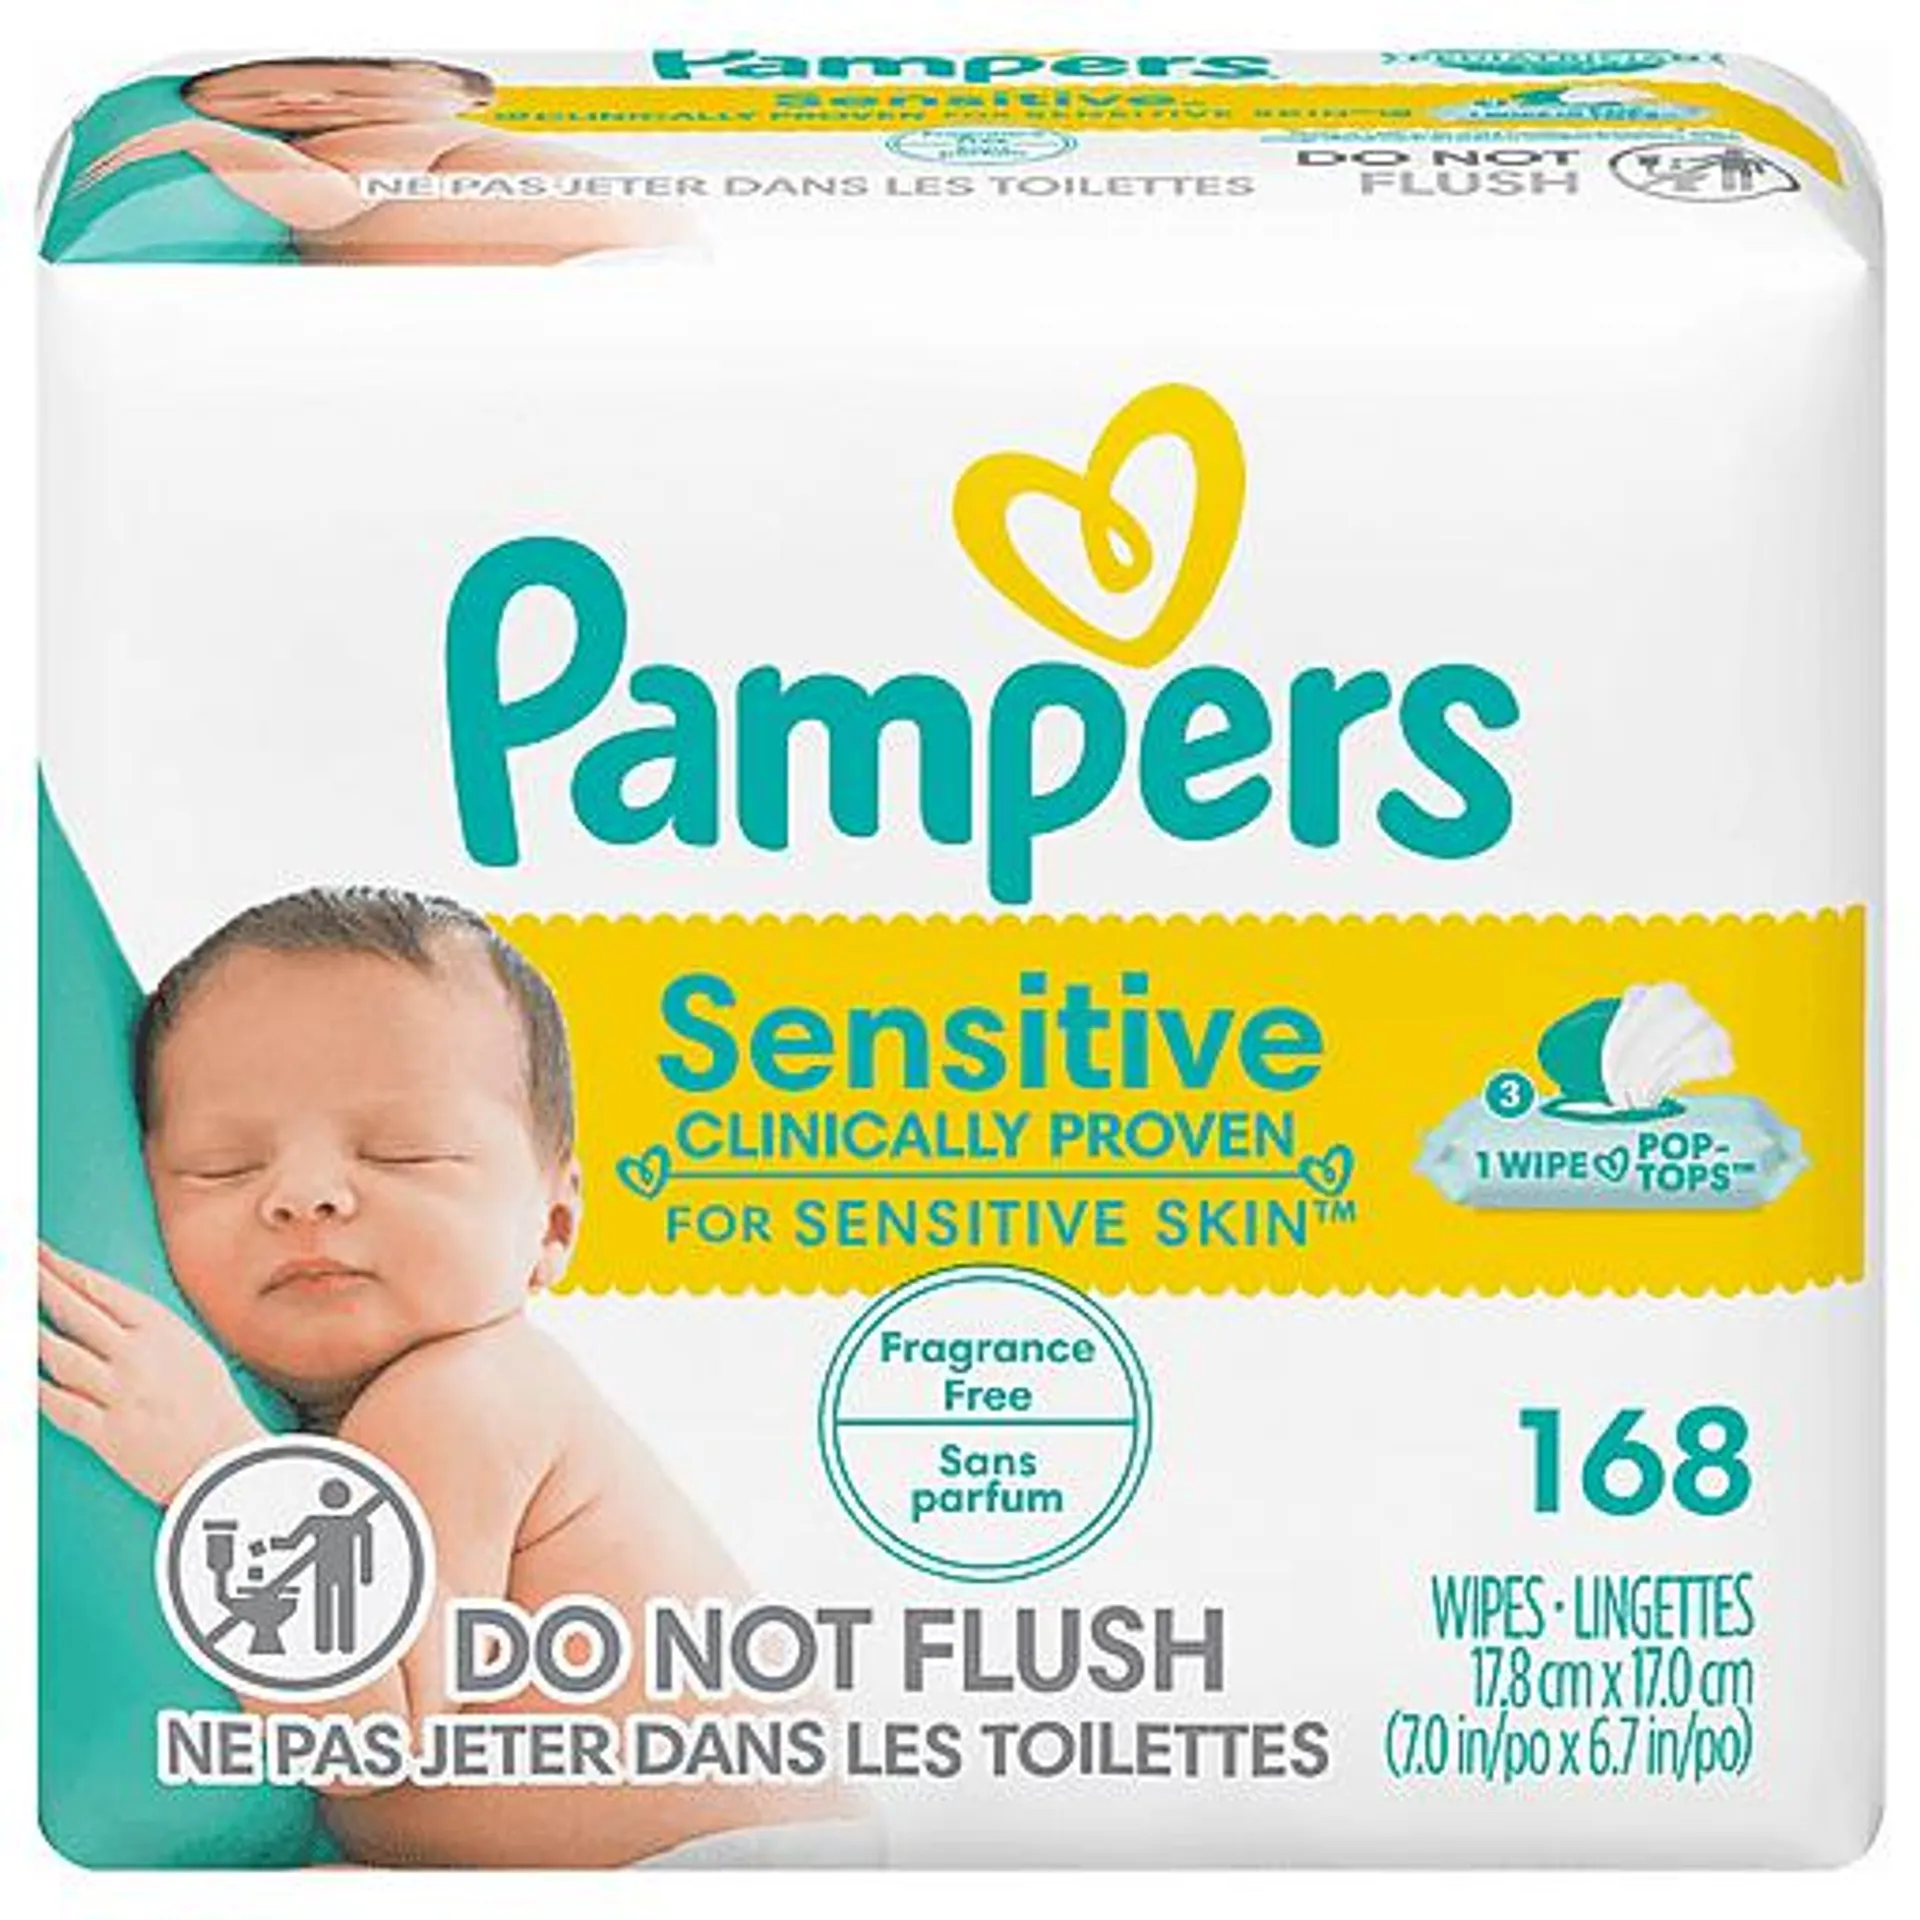 Pampers Sensitive Perfume Free Baby Wipes 168 ct 3 pack box